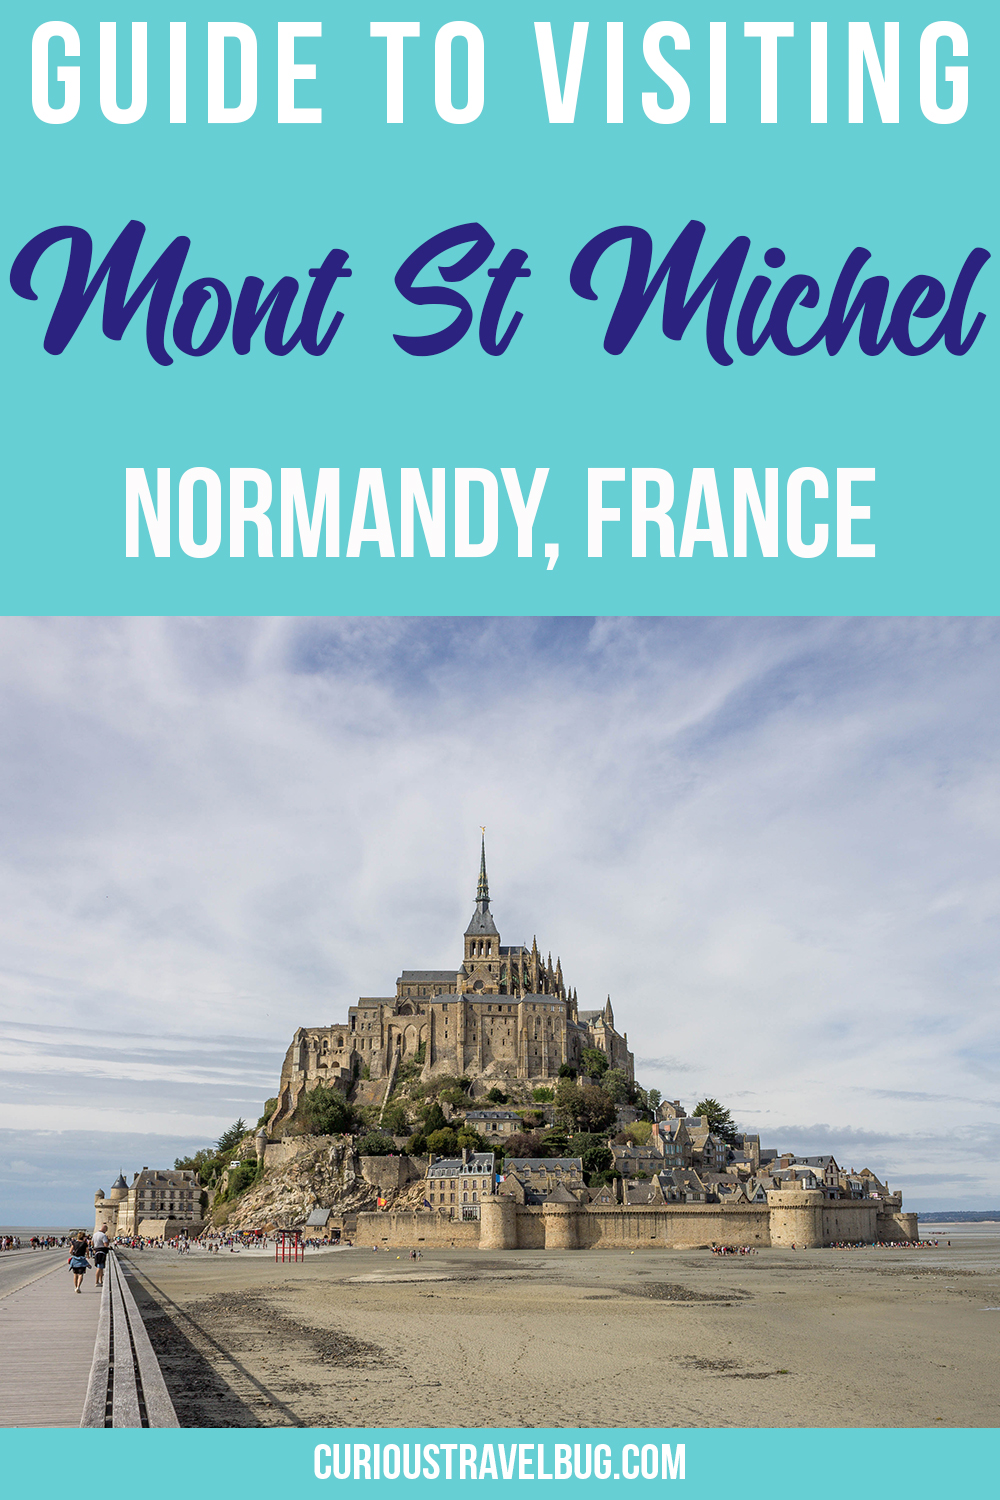 Full guide to visiting the UNESCO world heritage site of Mont Saint Michel in Normanday France. You can visit this location as a day trip from France but it is much better to visit and stay in the area to fully experience the town.